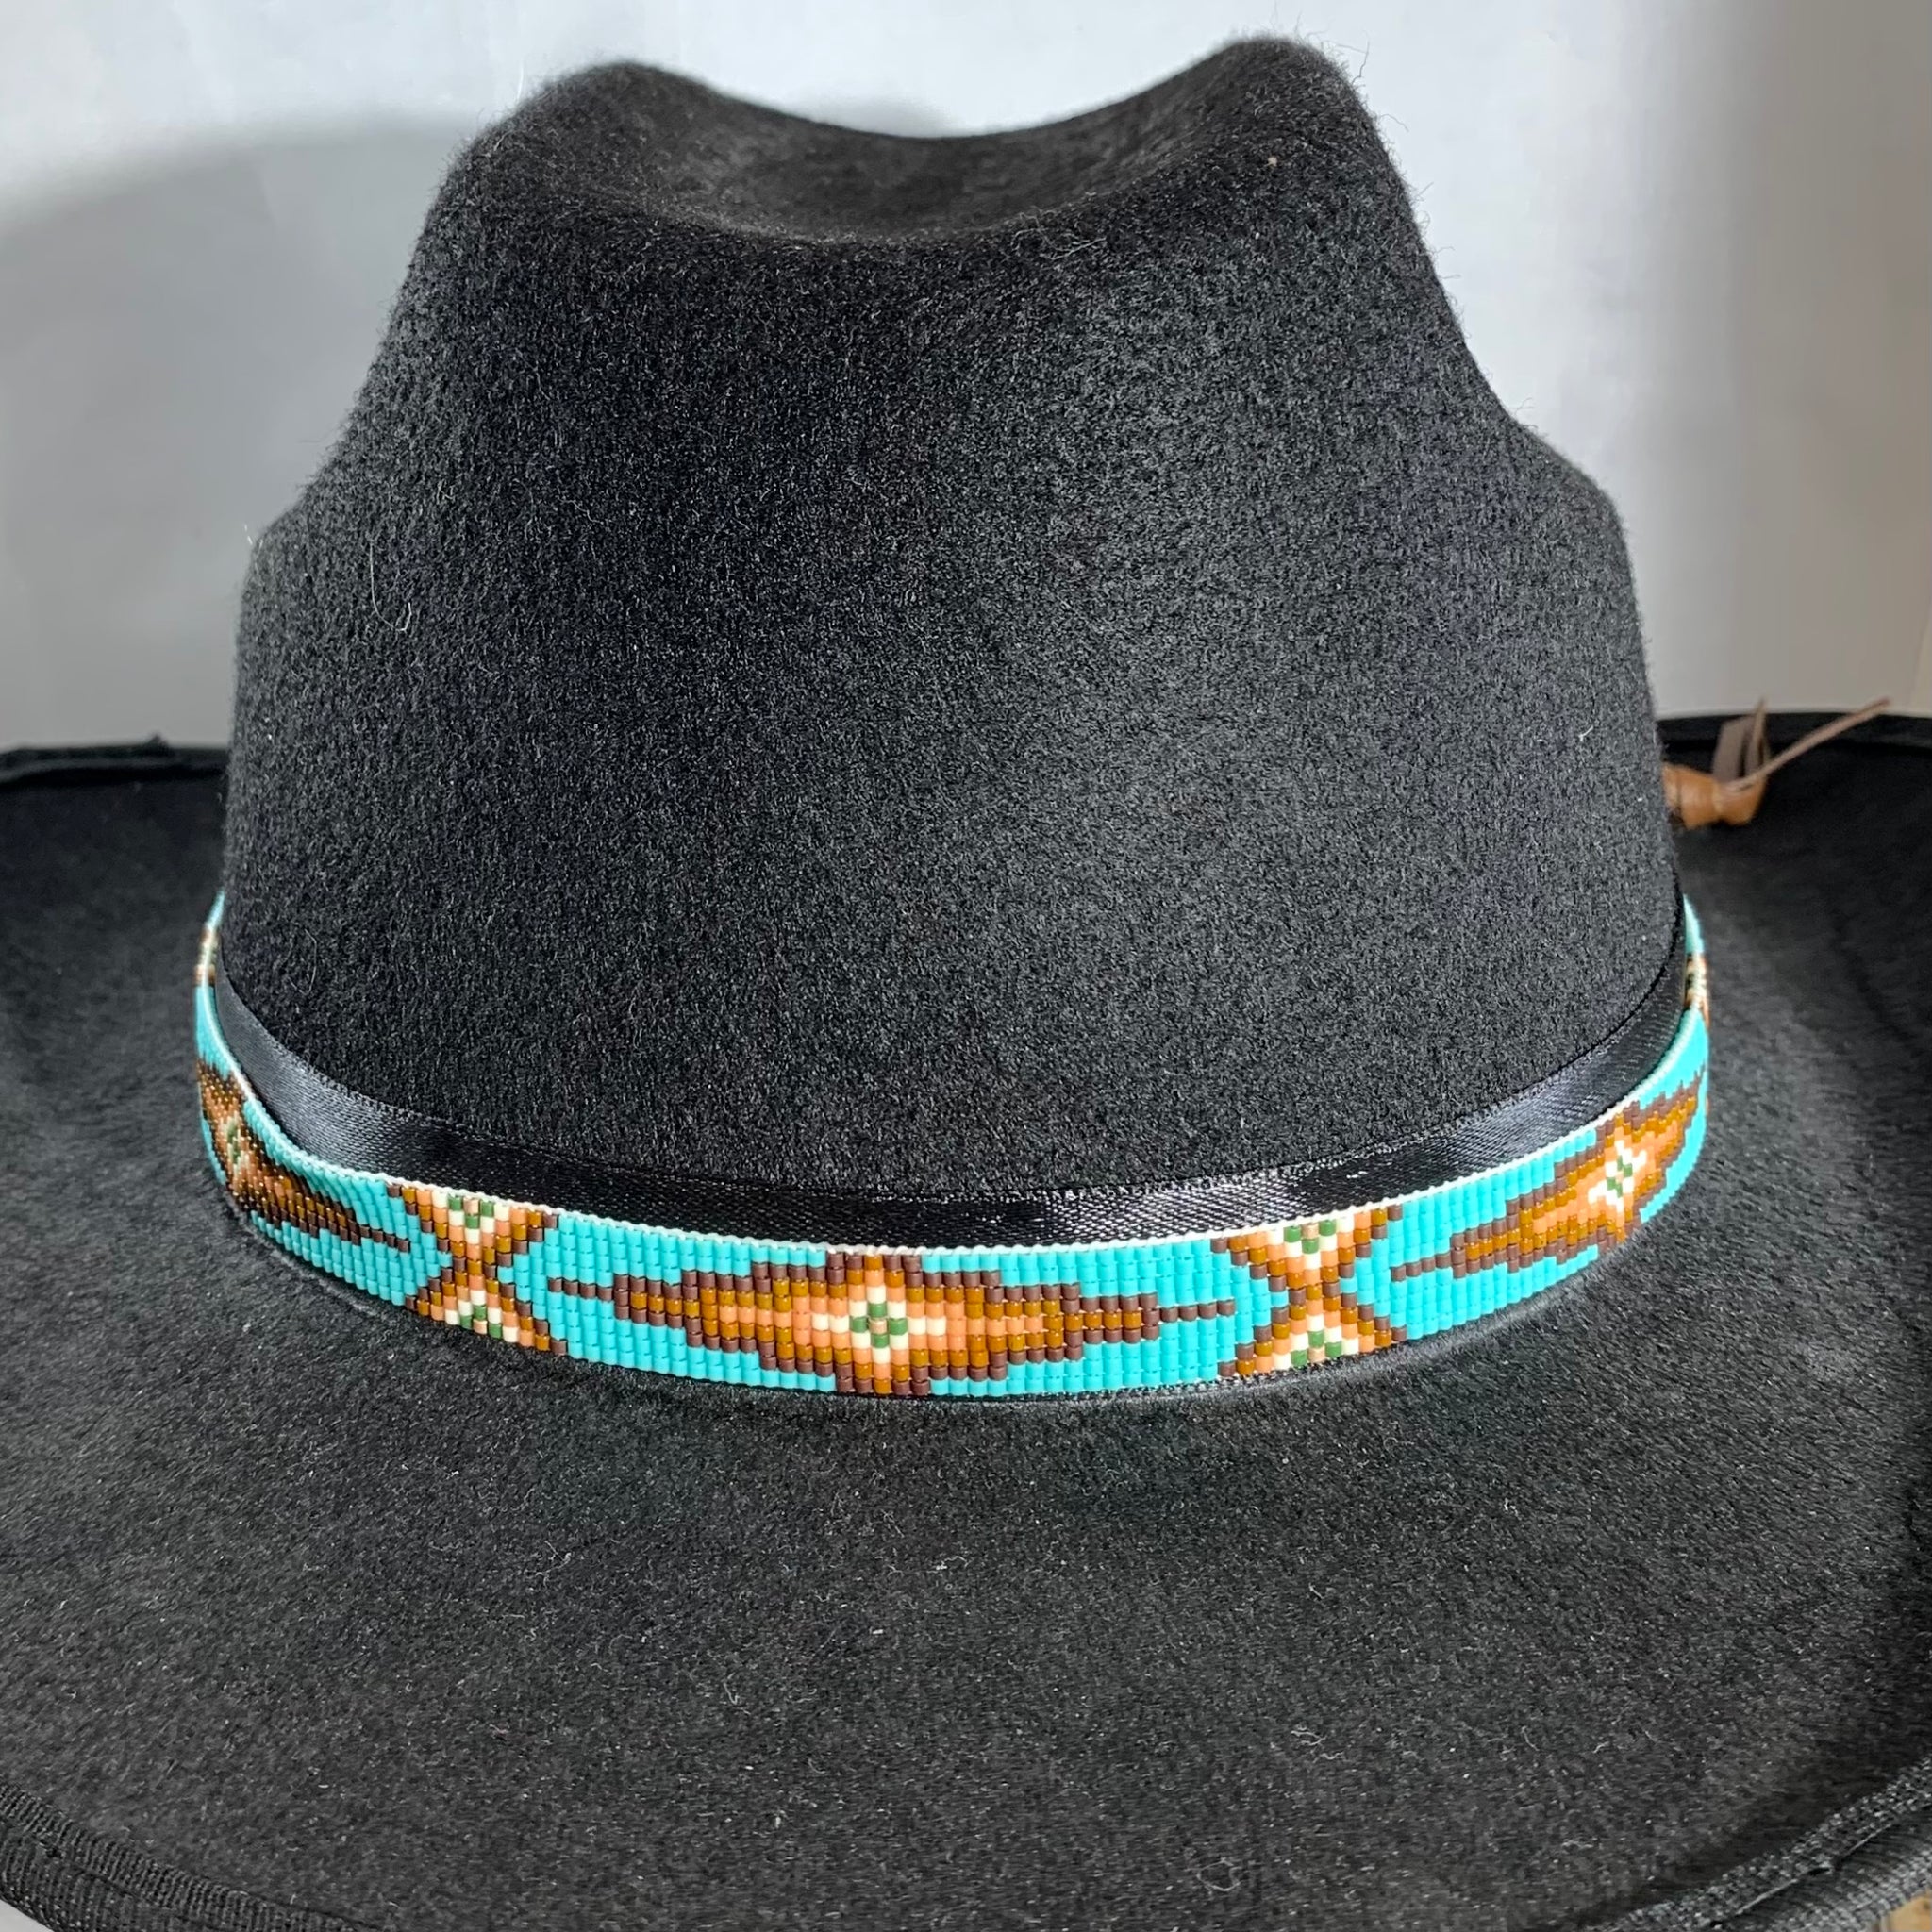 Turquoise Beaded Hat Band by Pamela Chappell